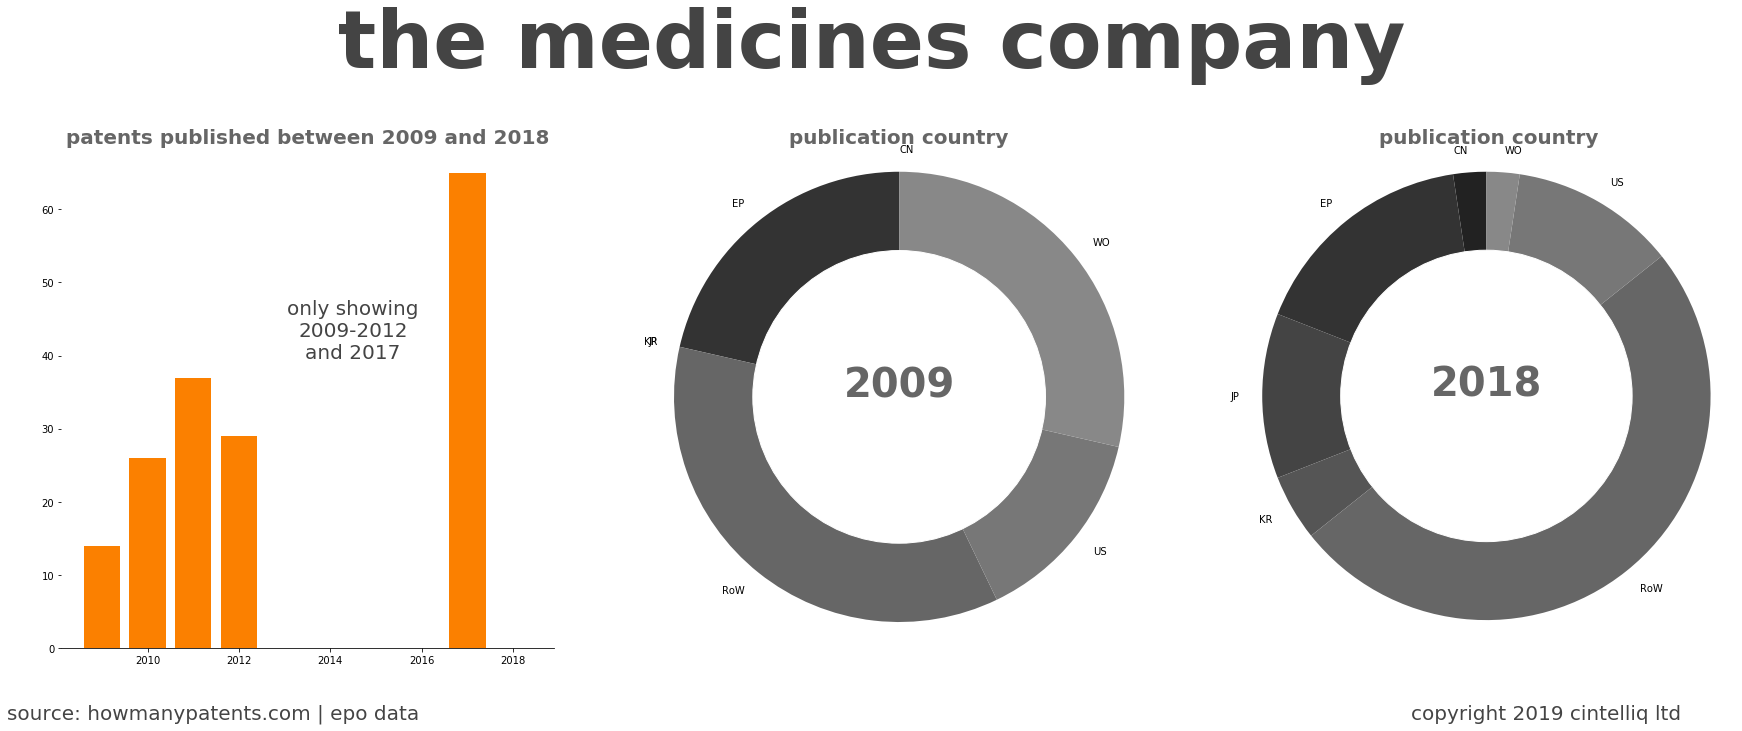 summary of patents for The Medicines Company